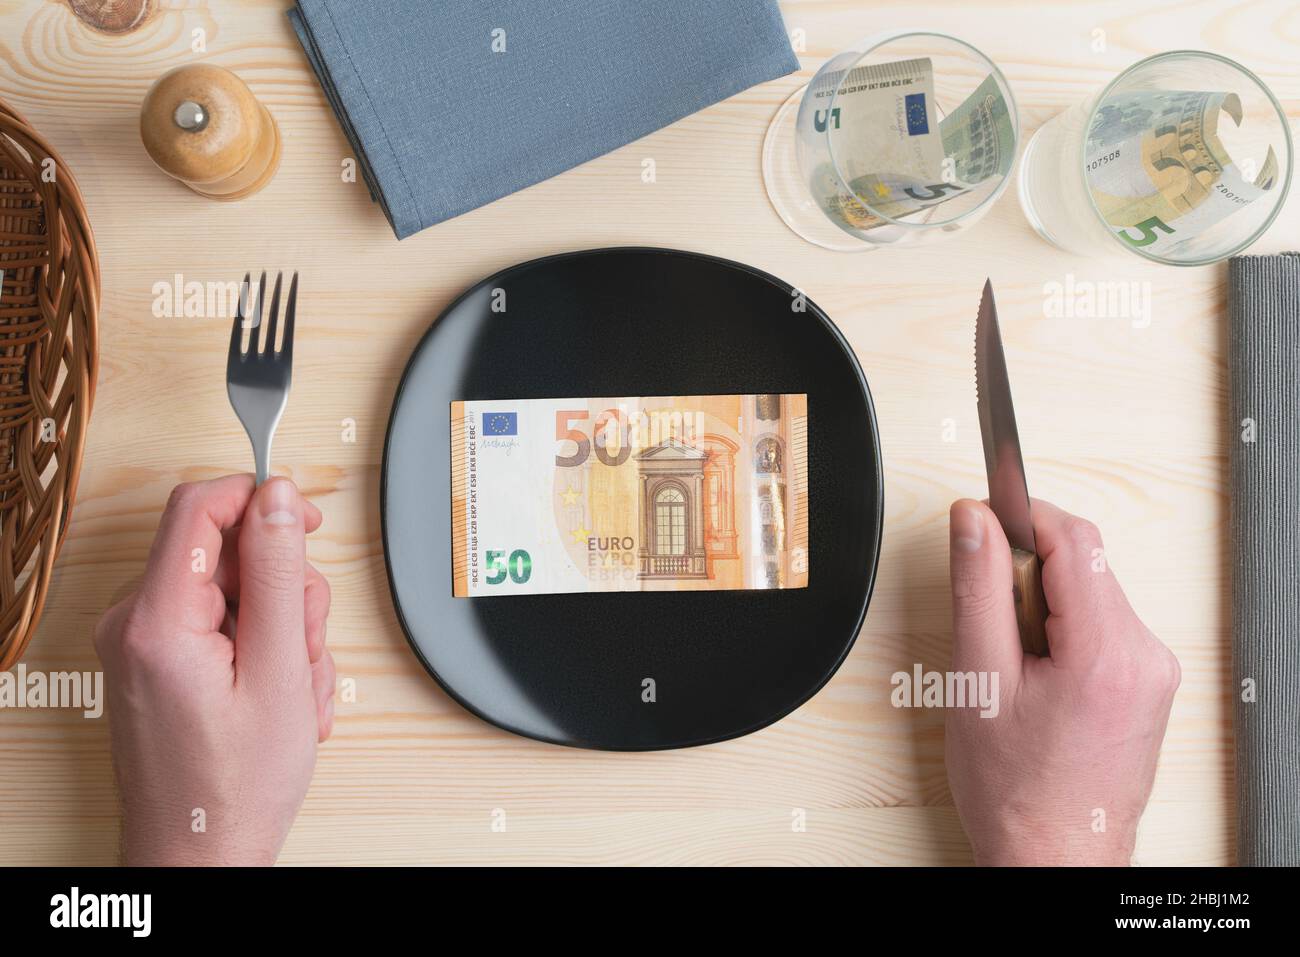 Conceptual studio shot of dinner table with euro bank notes on the plate instead of food. Concept for rising food prices, inflation, economic crisis Stock Photo